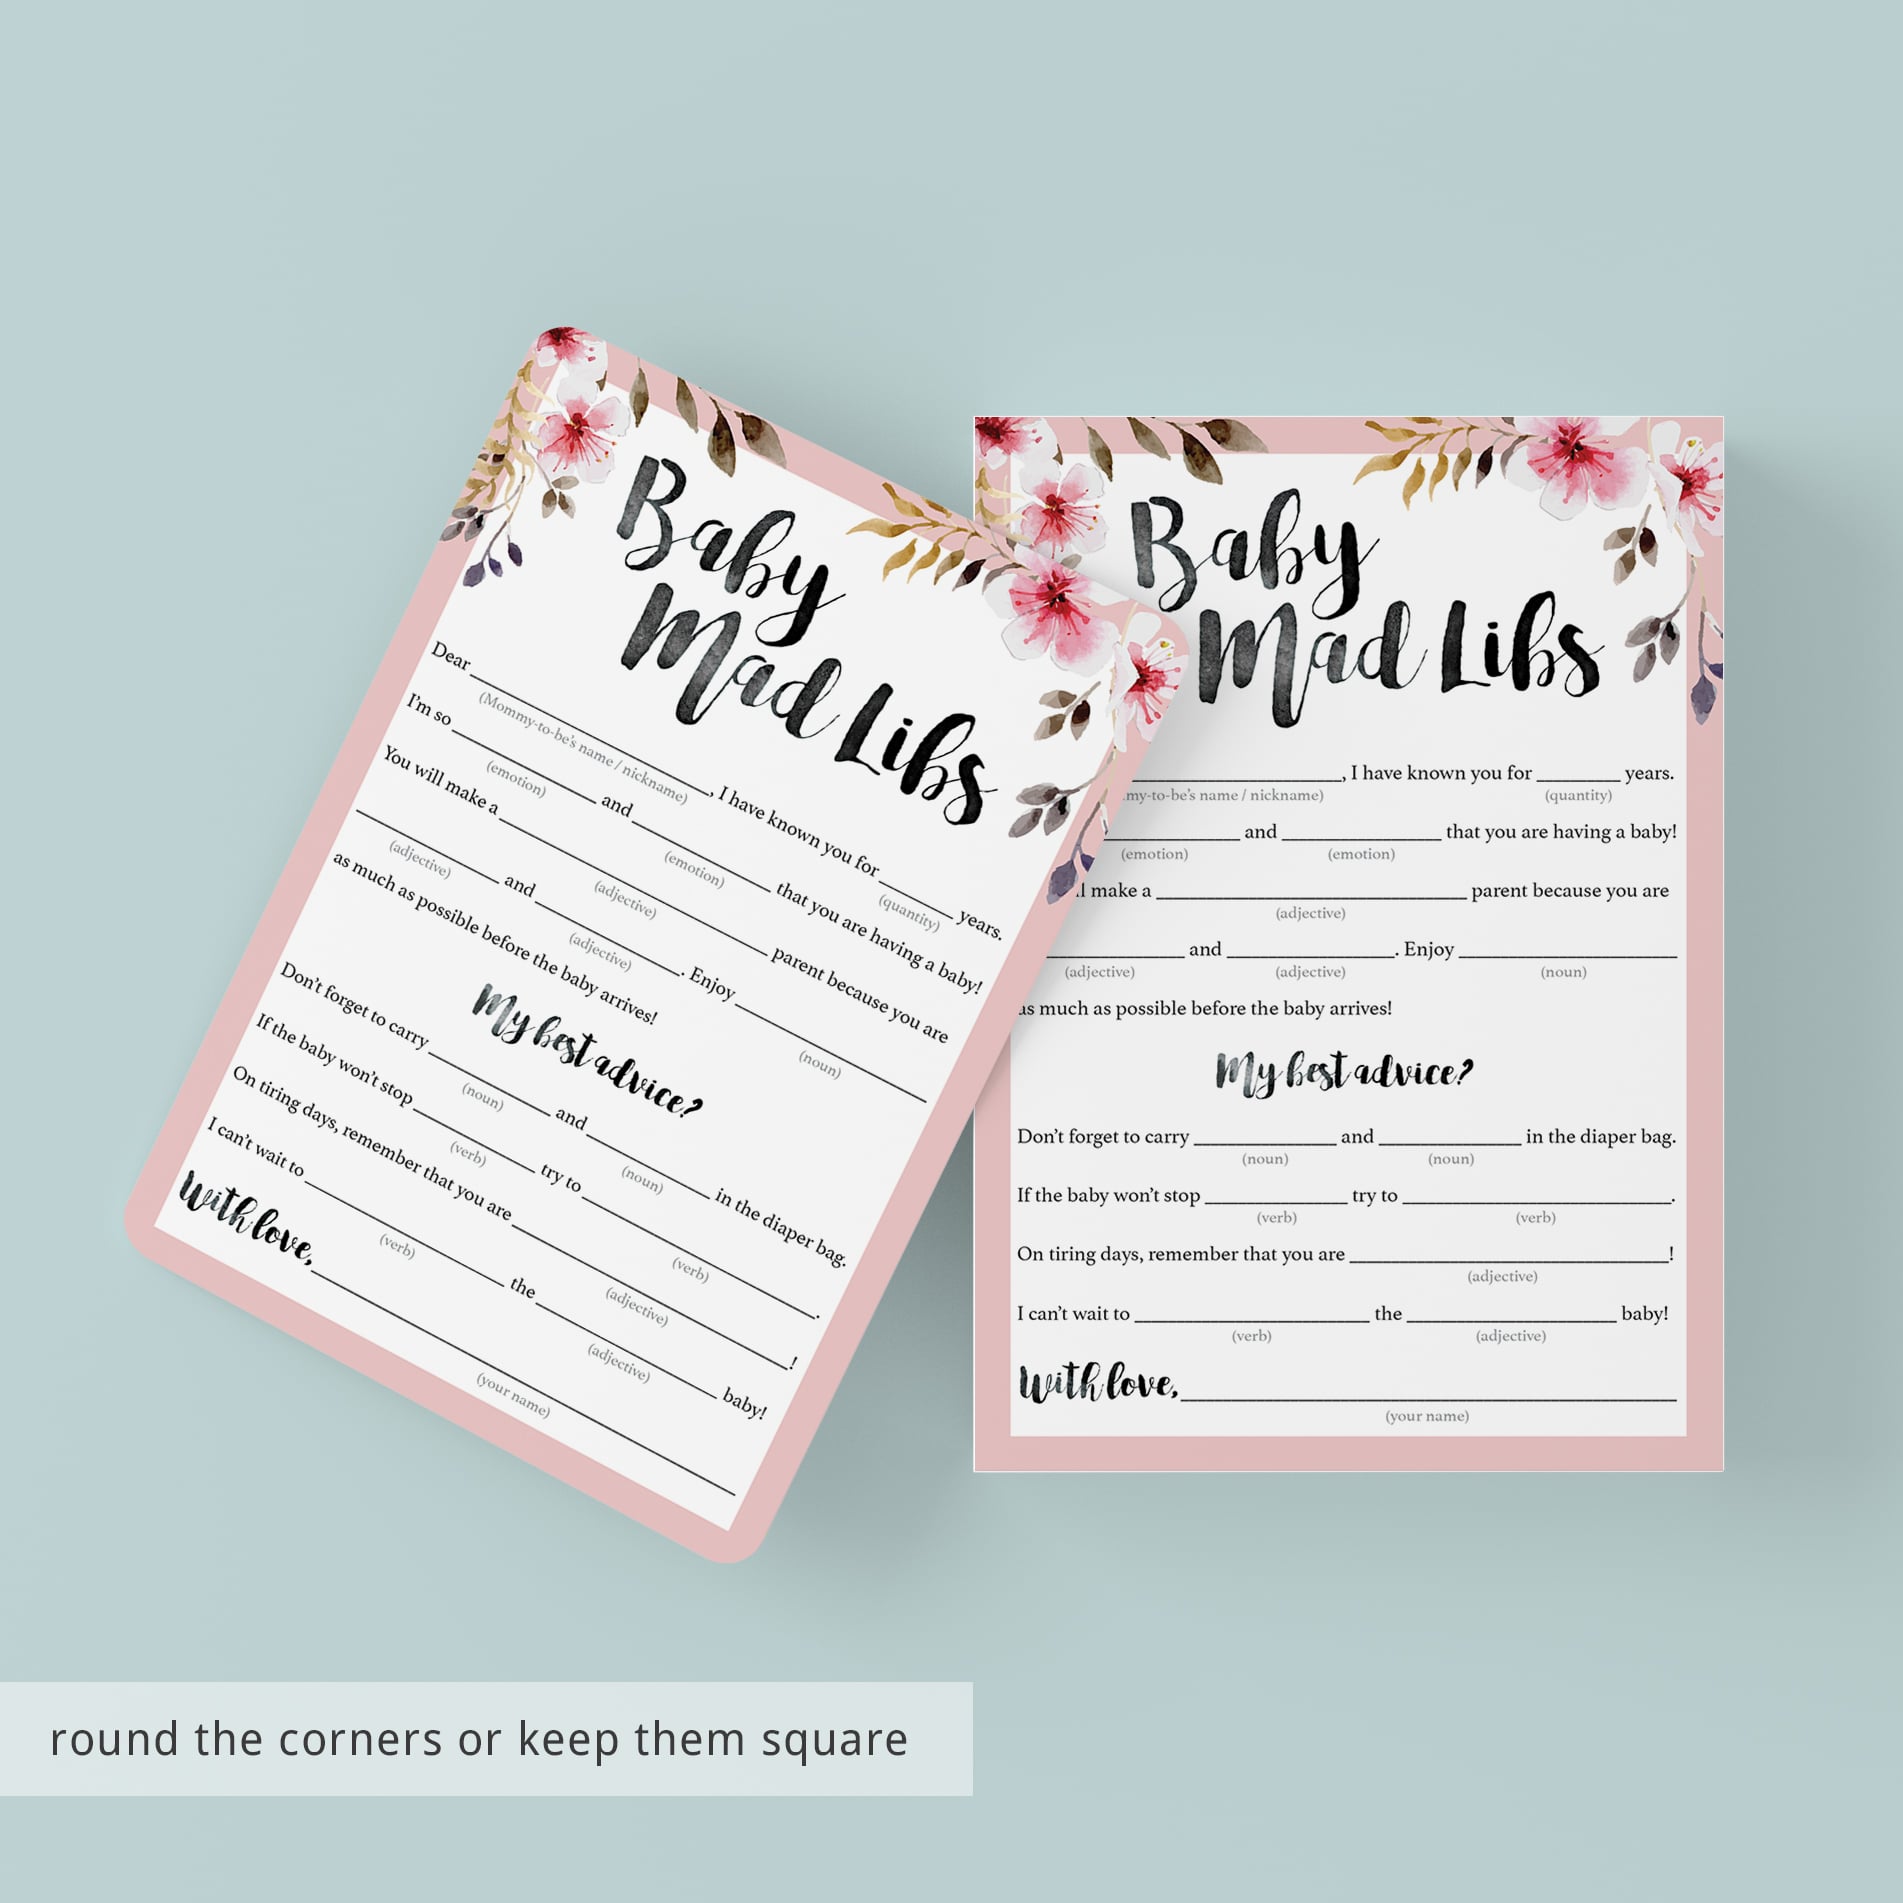 Baby madlibs shower game printable pink flowers by LittleSizzle